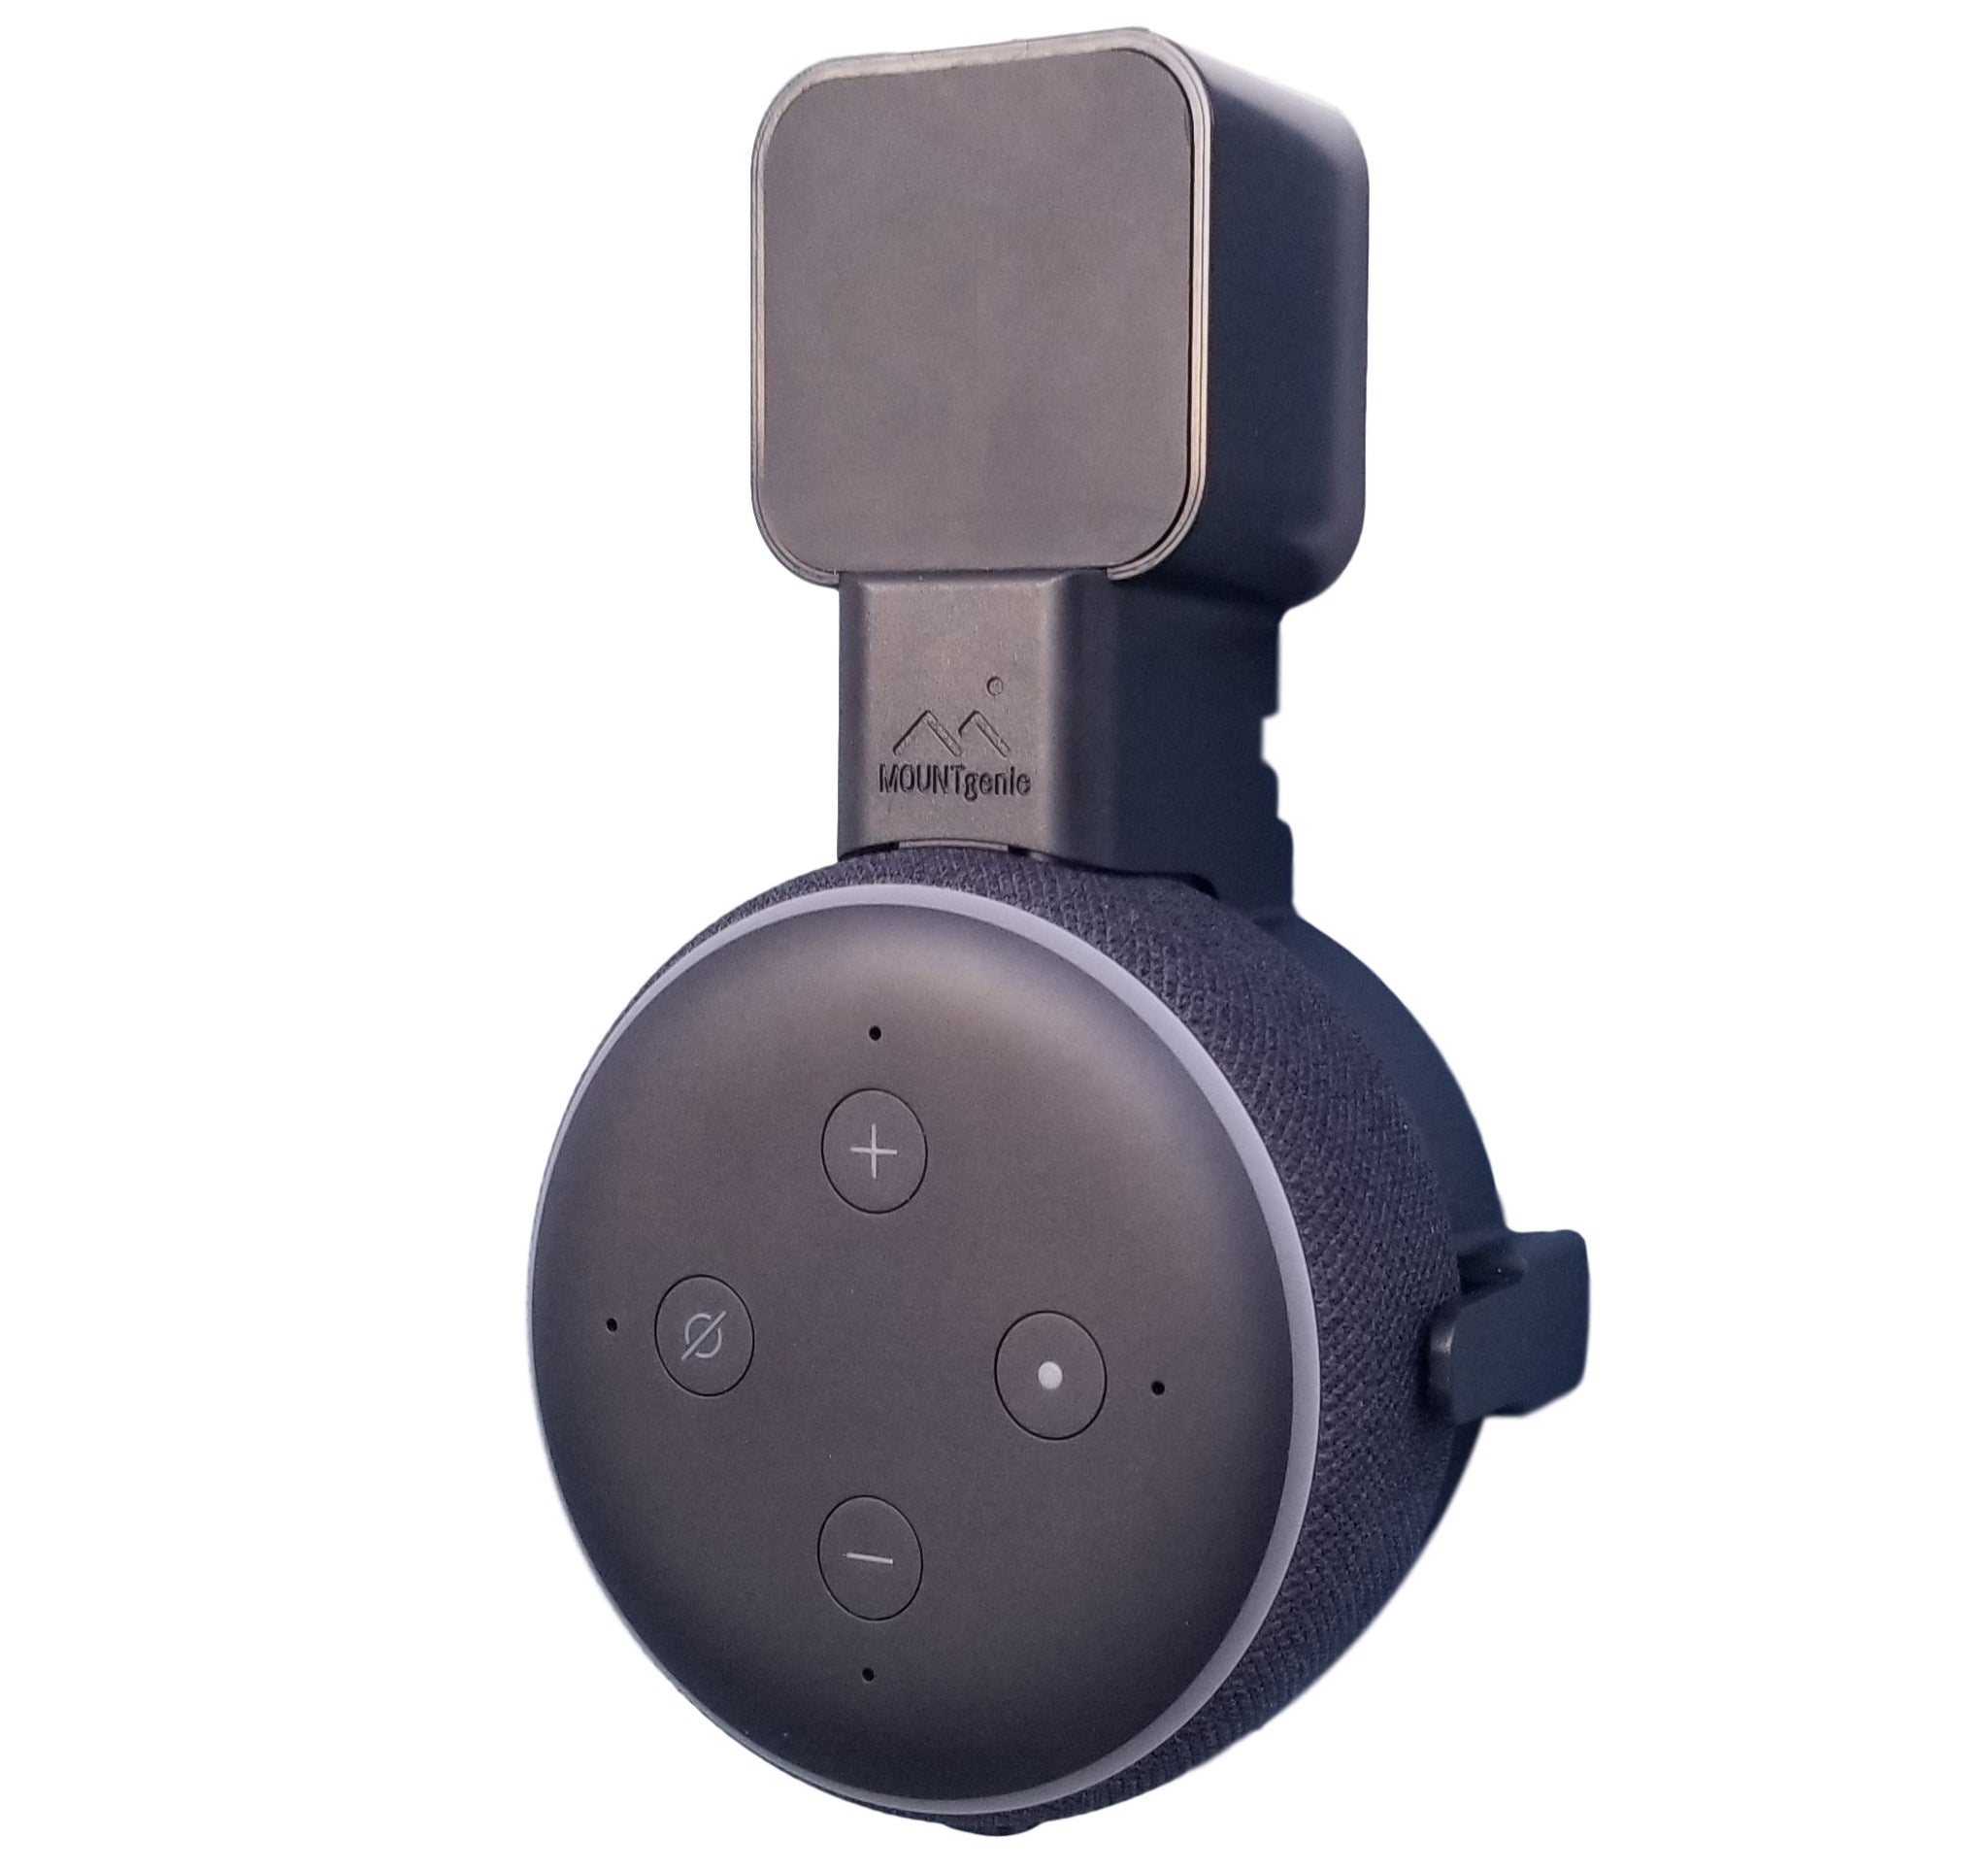 The Easy Outlet Mount for Echo Dot 3rd Generation – Mount Genie